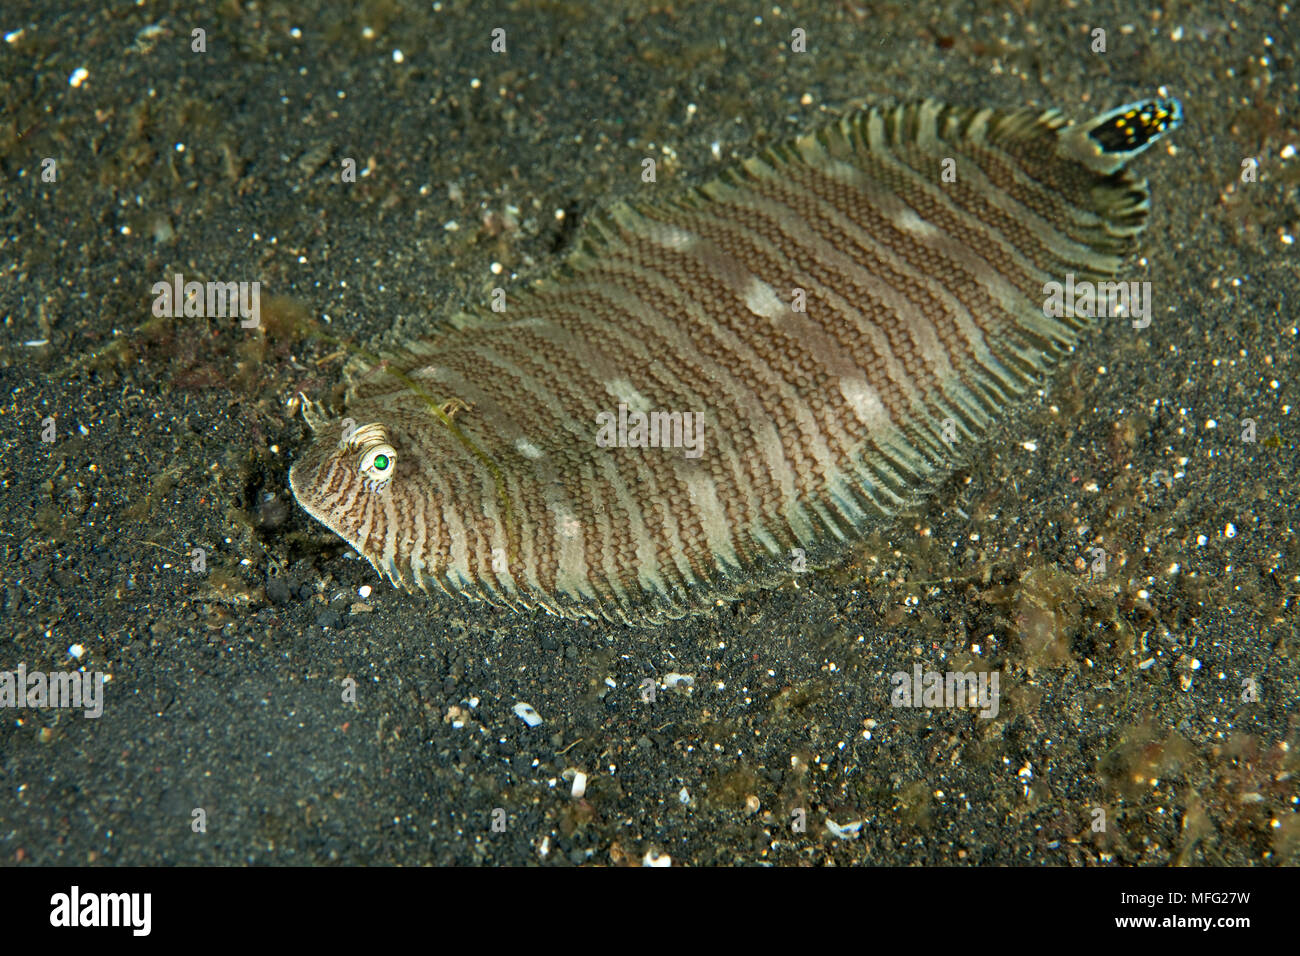 Spotted-Tail sole, Zebrias fasciatus, Lembeh Strait, North Sulawesi, Indonesia, Pacific Ocean Stock Photo